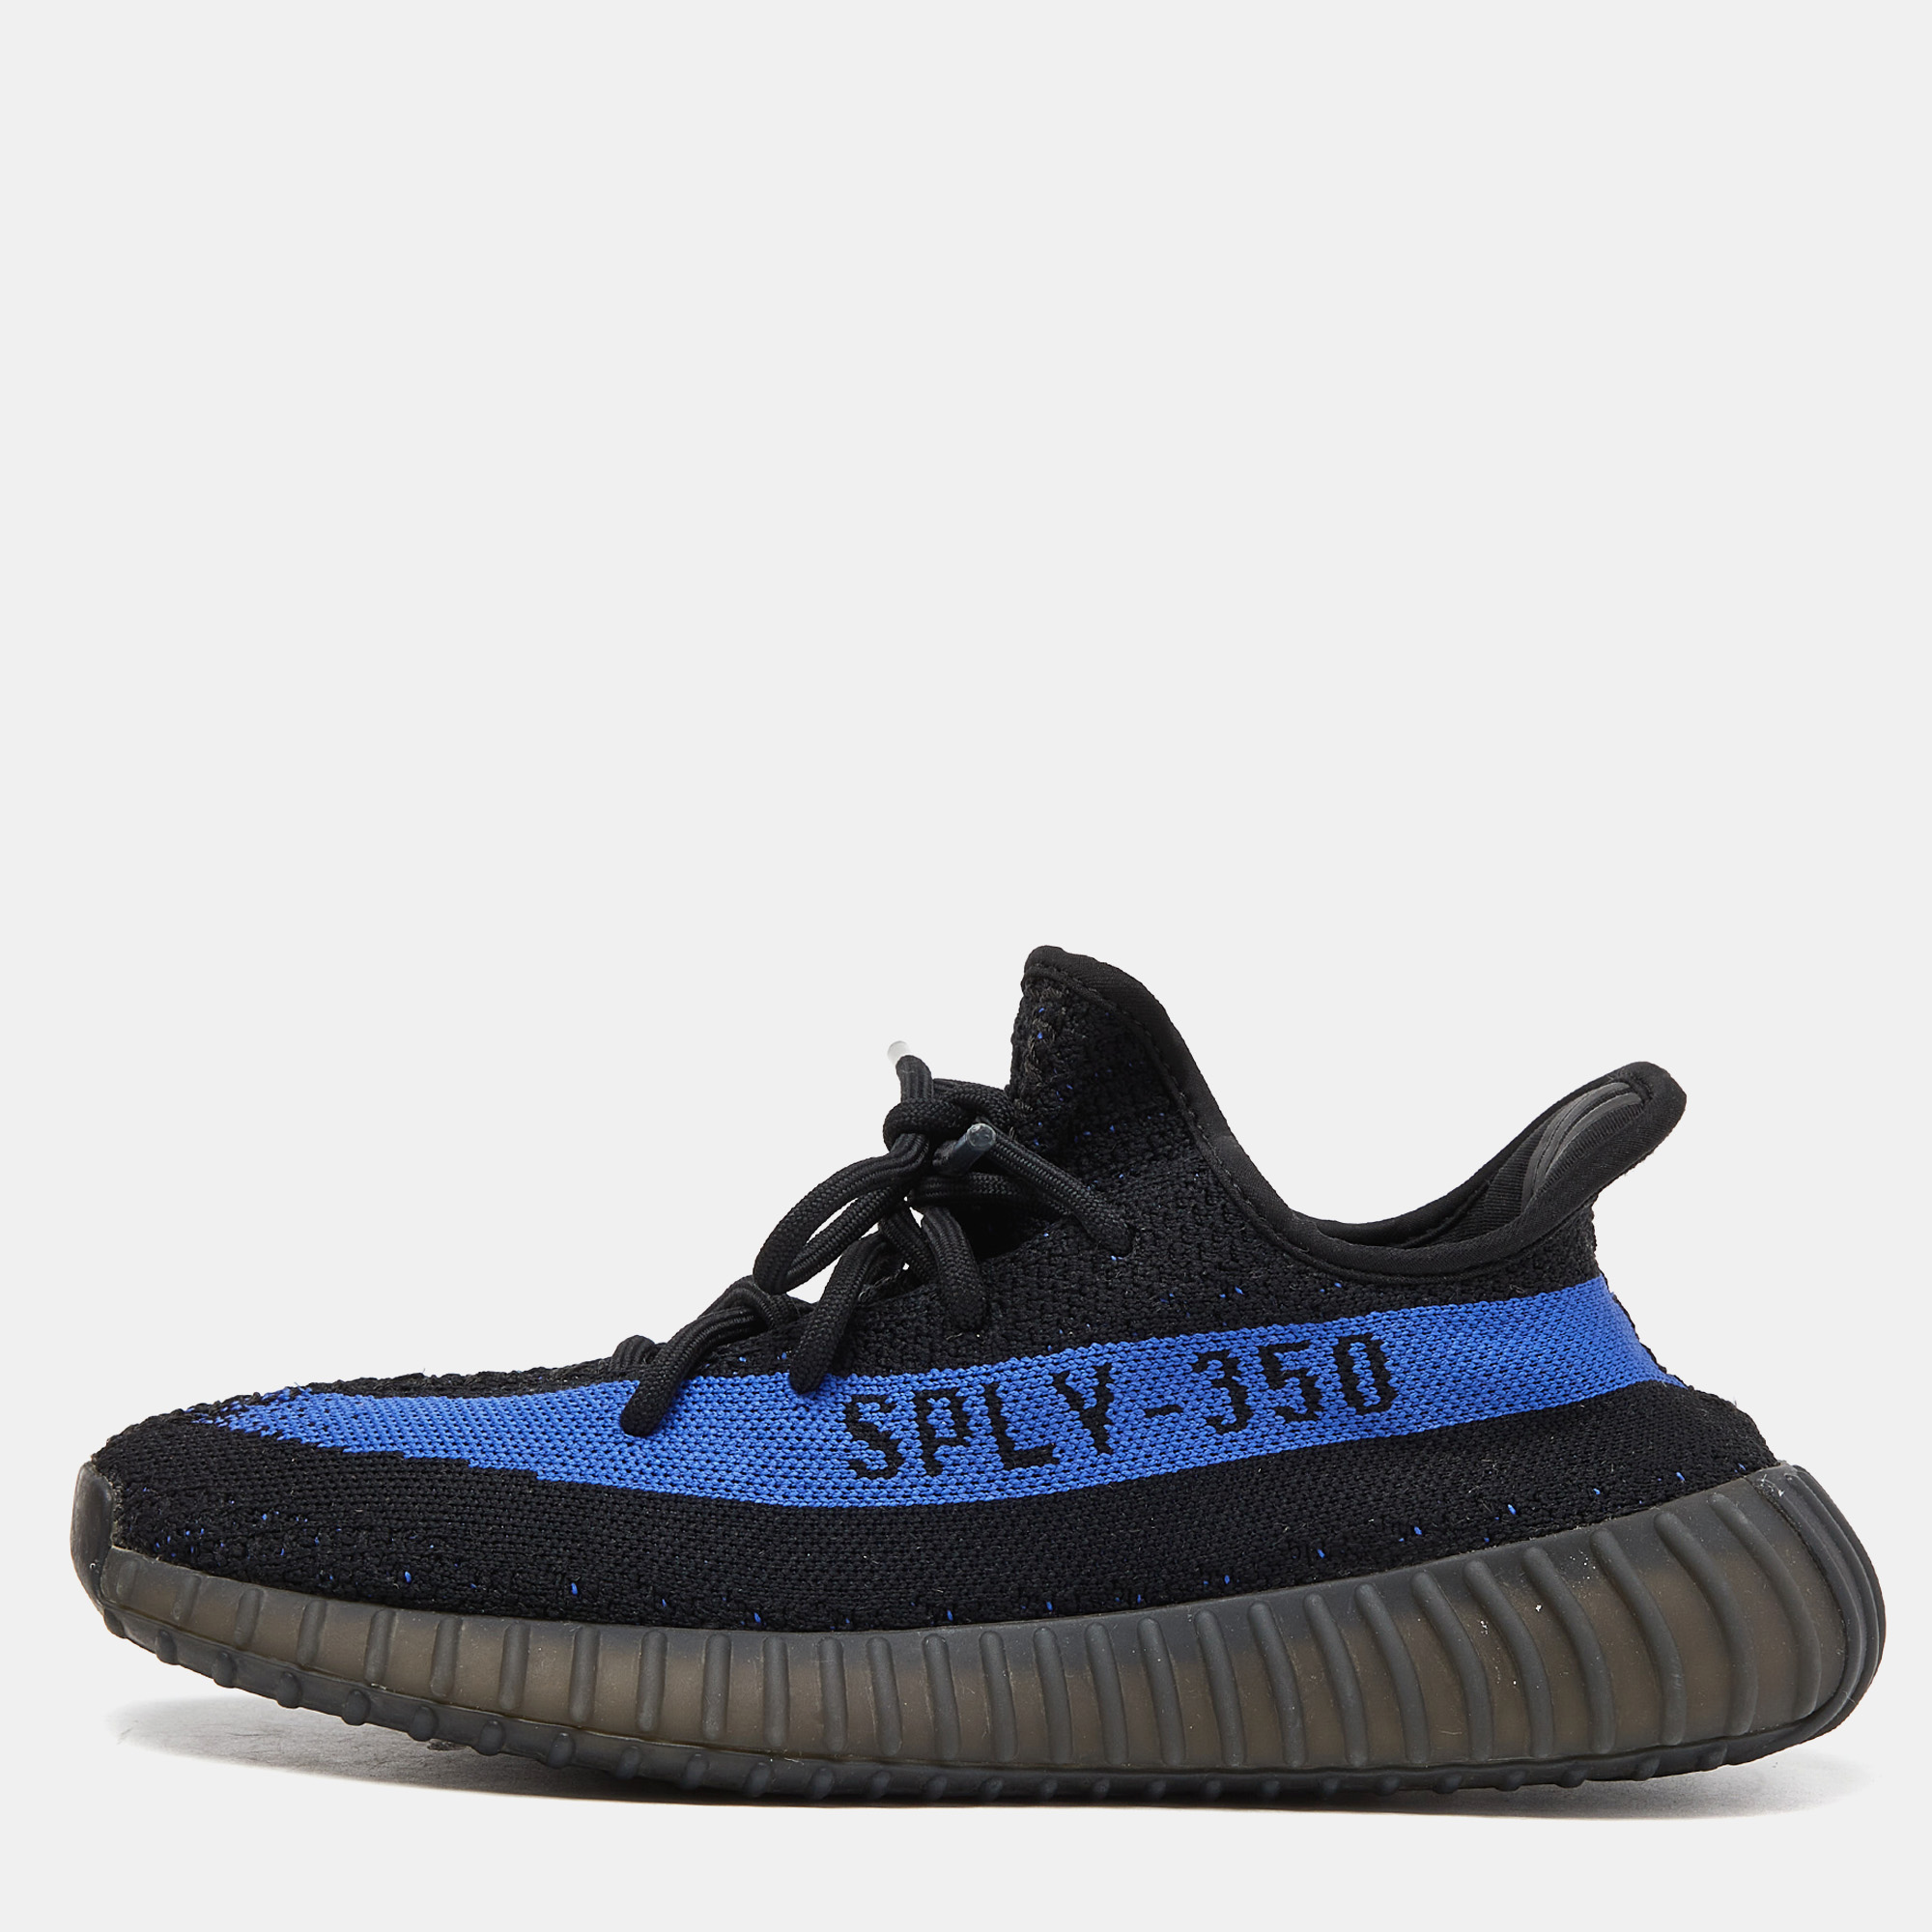 Pre-owned Yeezy X Adidas Black/blue Knit Fabric Boost 350 V2 Blue Trainers Size 40 2/3